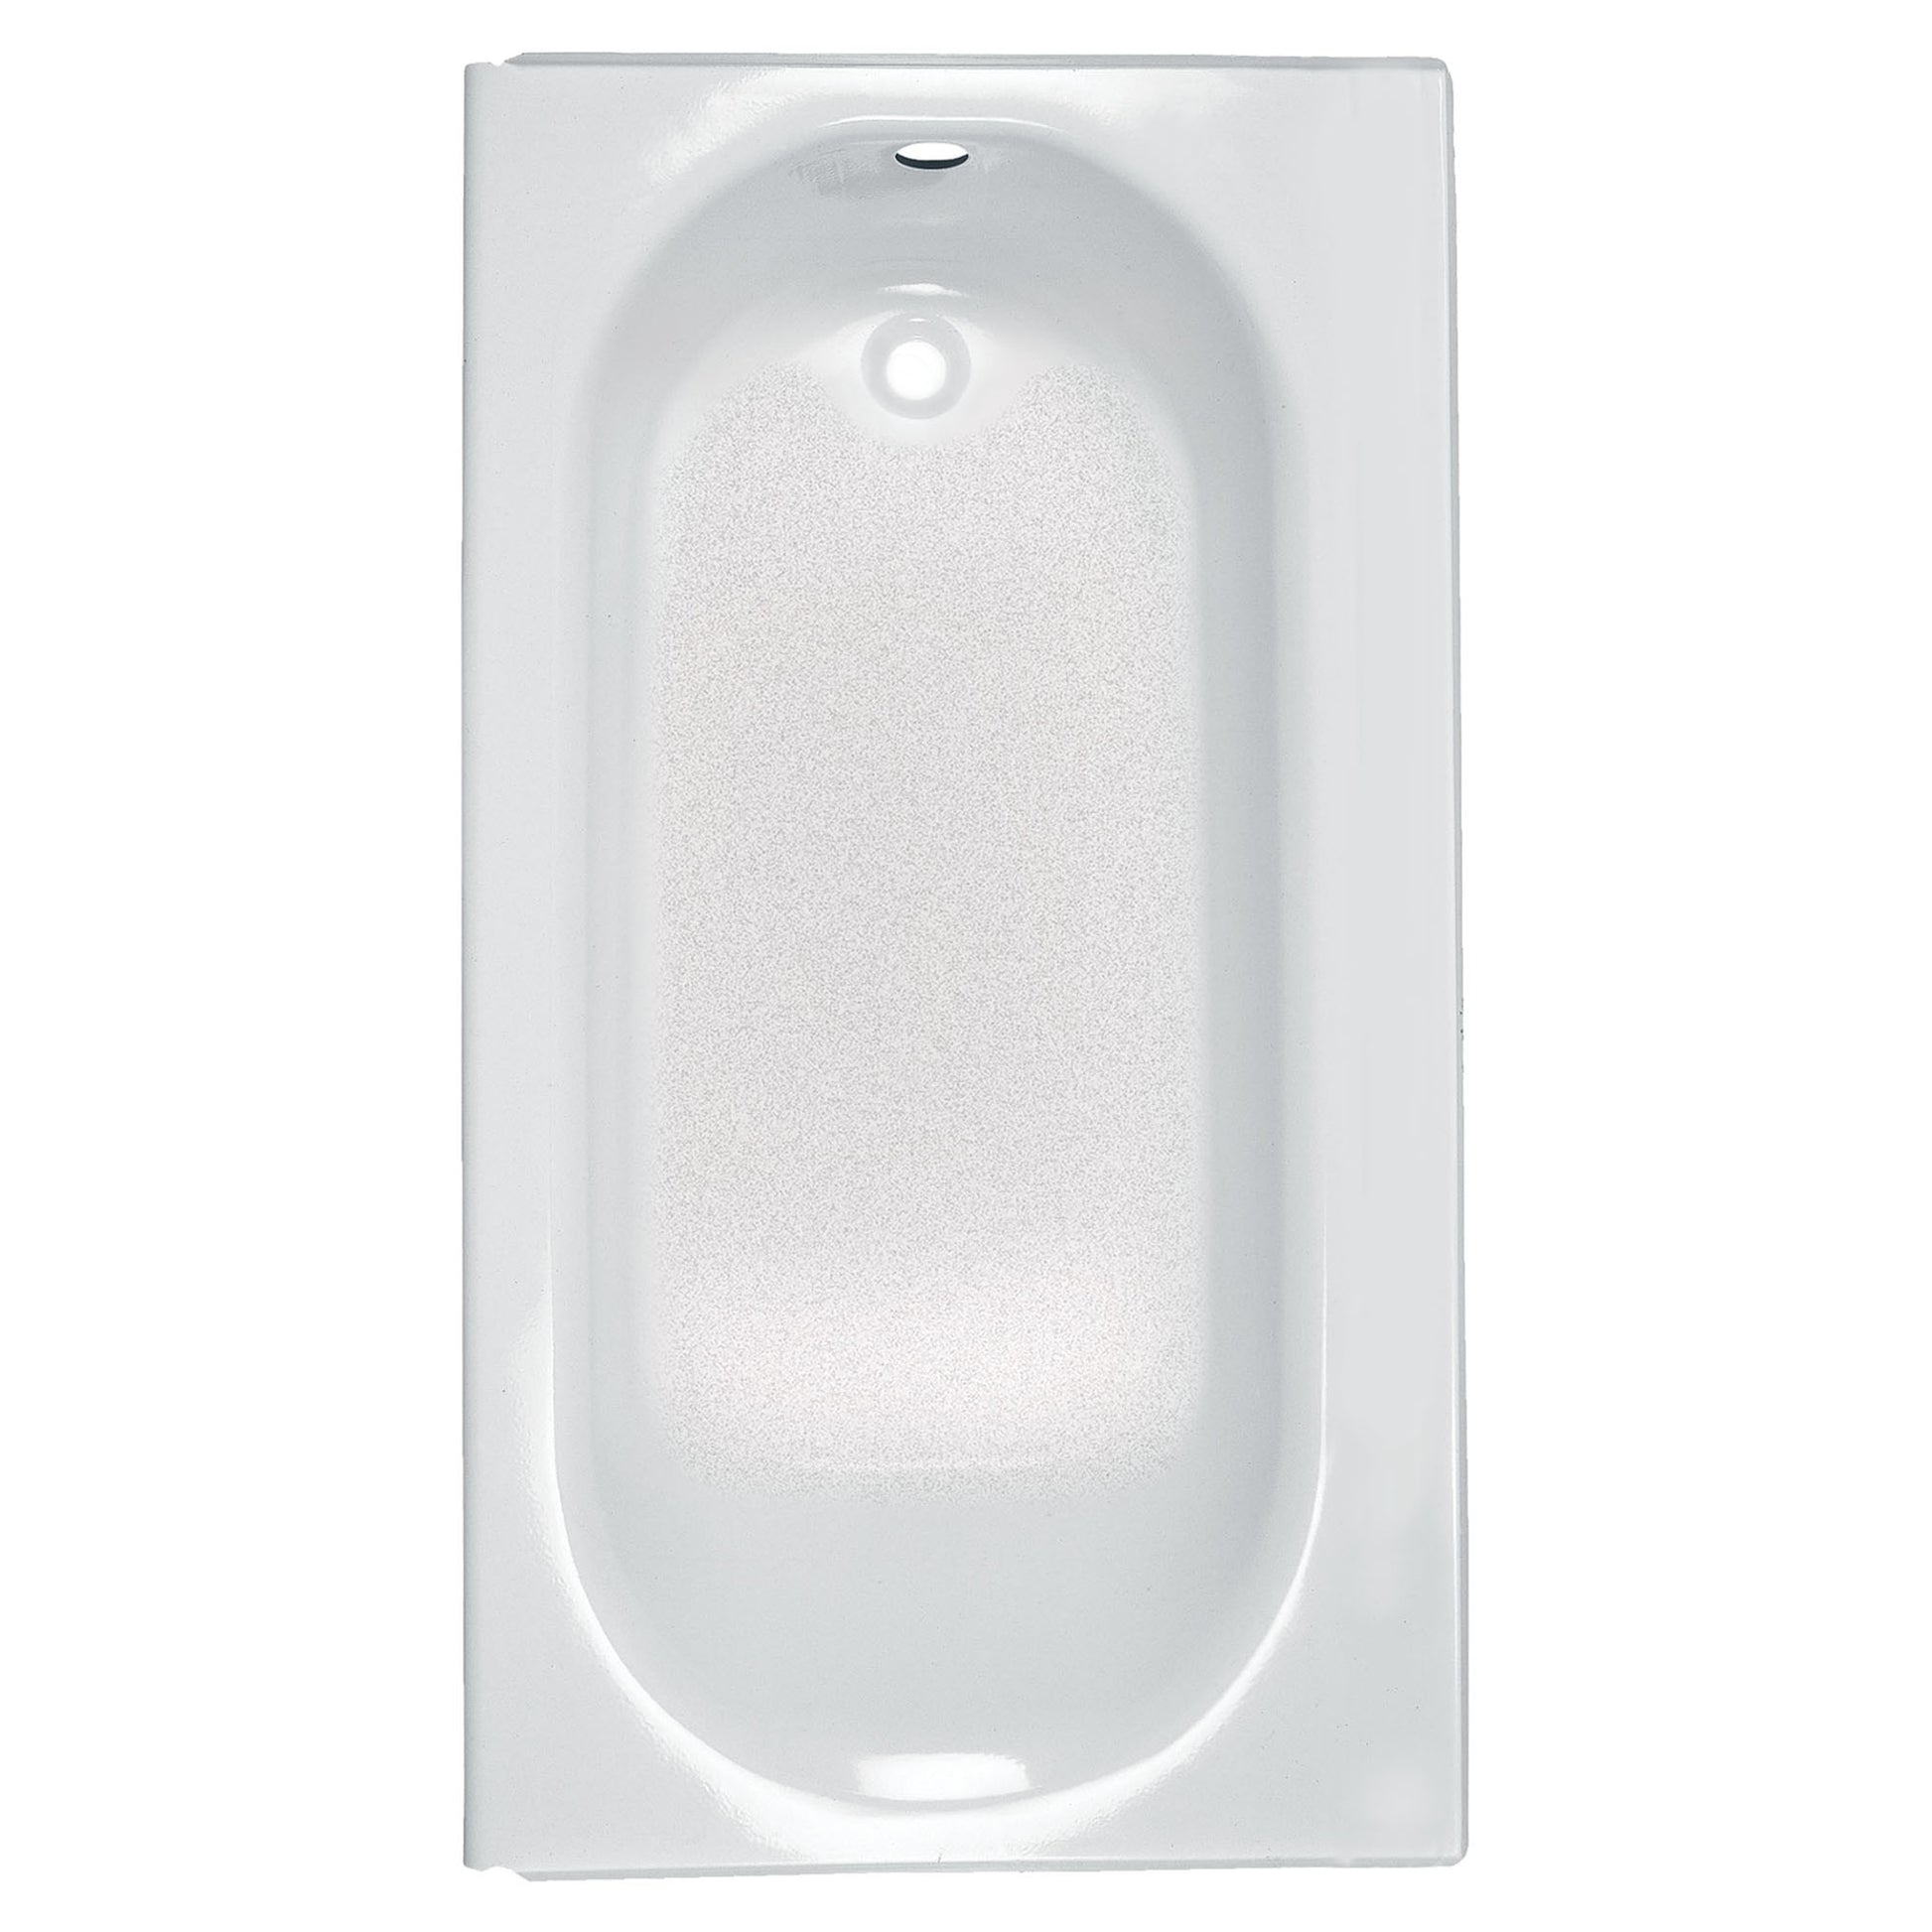 AMERICAN-STANDARD 2396202.020, Princeton Americast 60 x 34-Inch Integral Apron Bathtub Above Floor Rough Left-Hand Outlet with Luxury Ledge in White